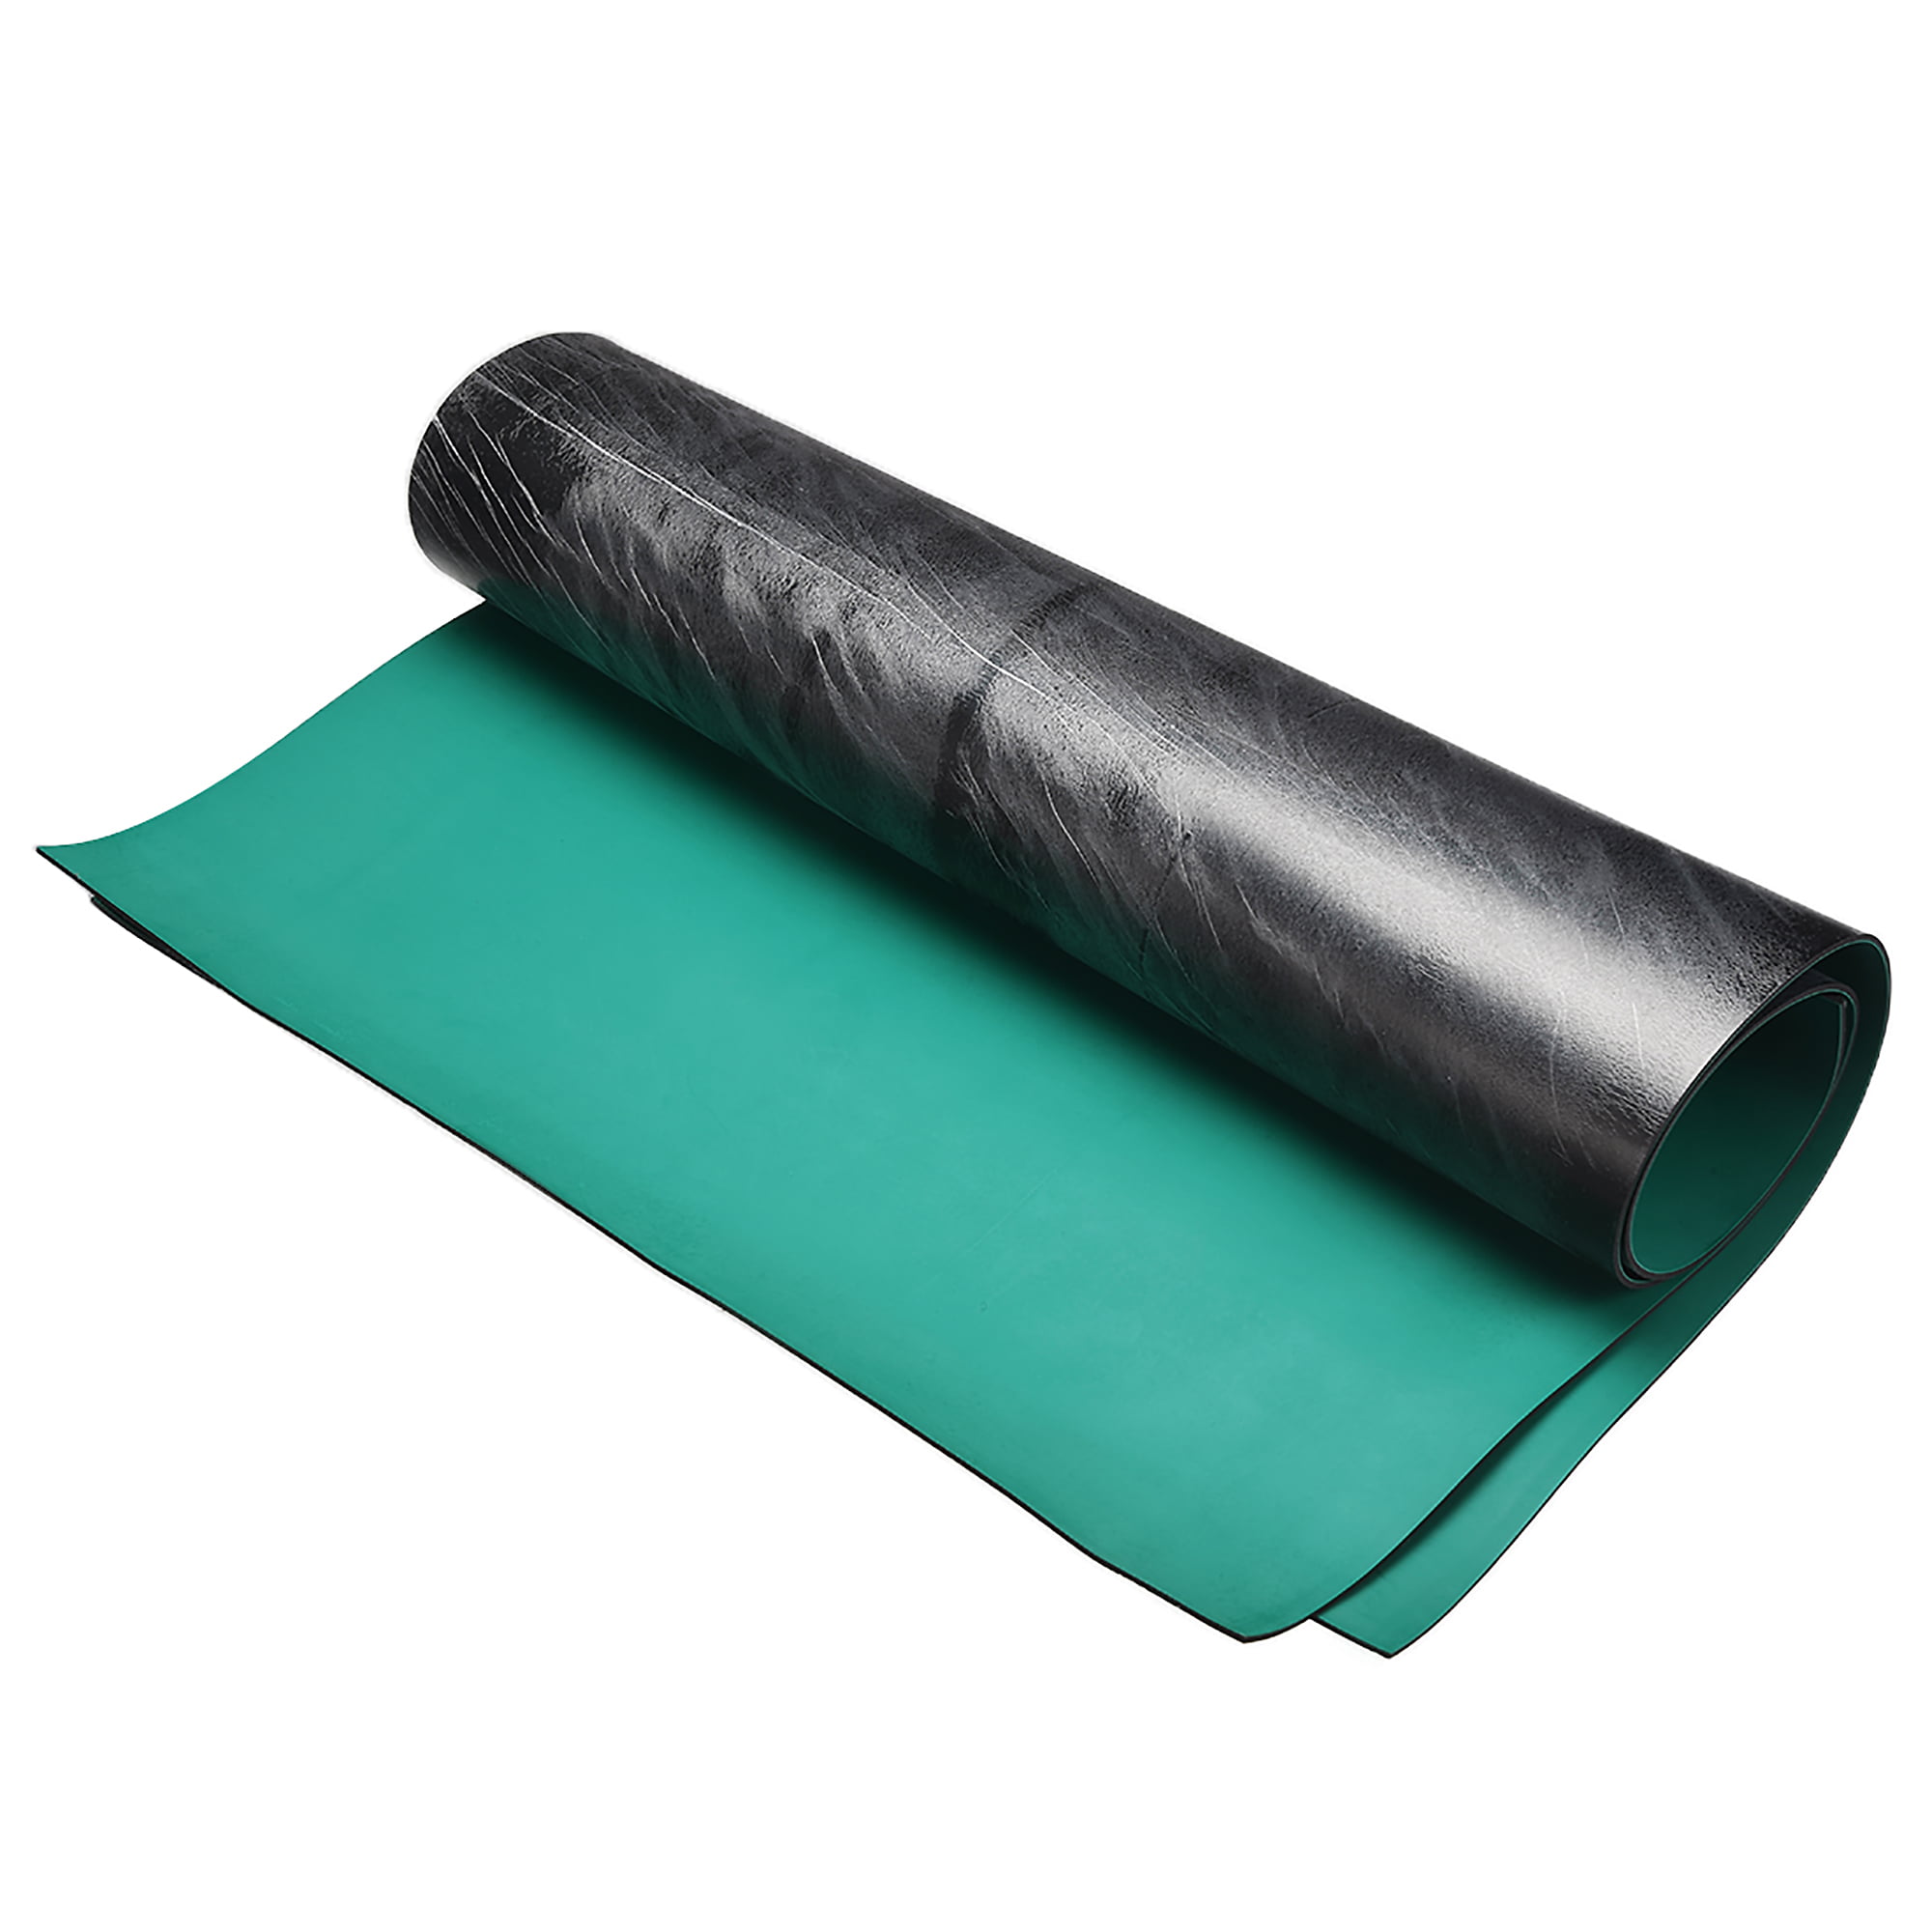 Lucent R-3154 36" x 58" Flame Retardant ESD Insulating Mat with Case and Clip 